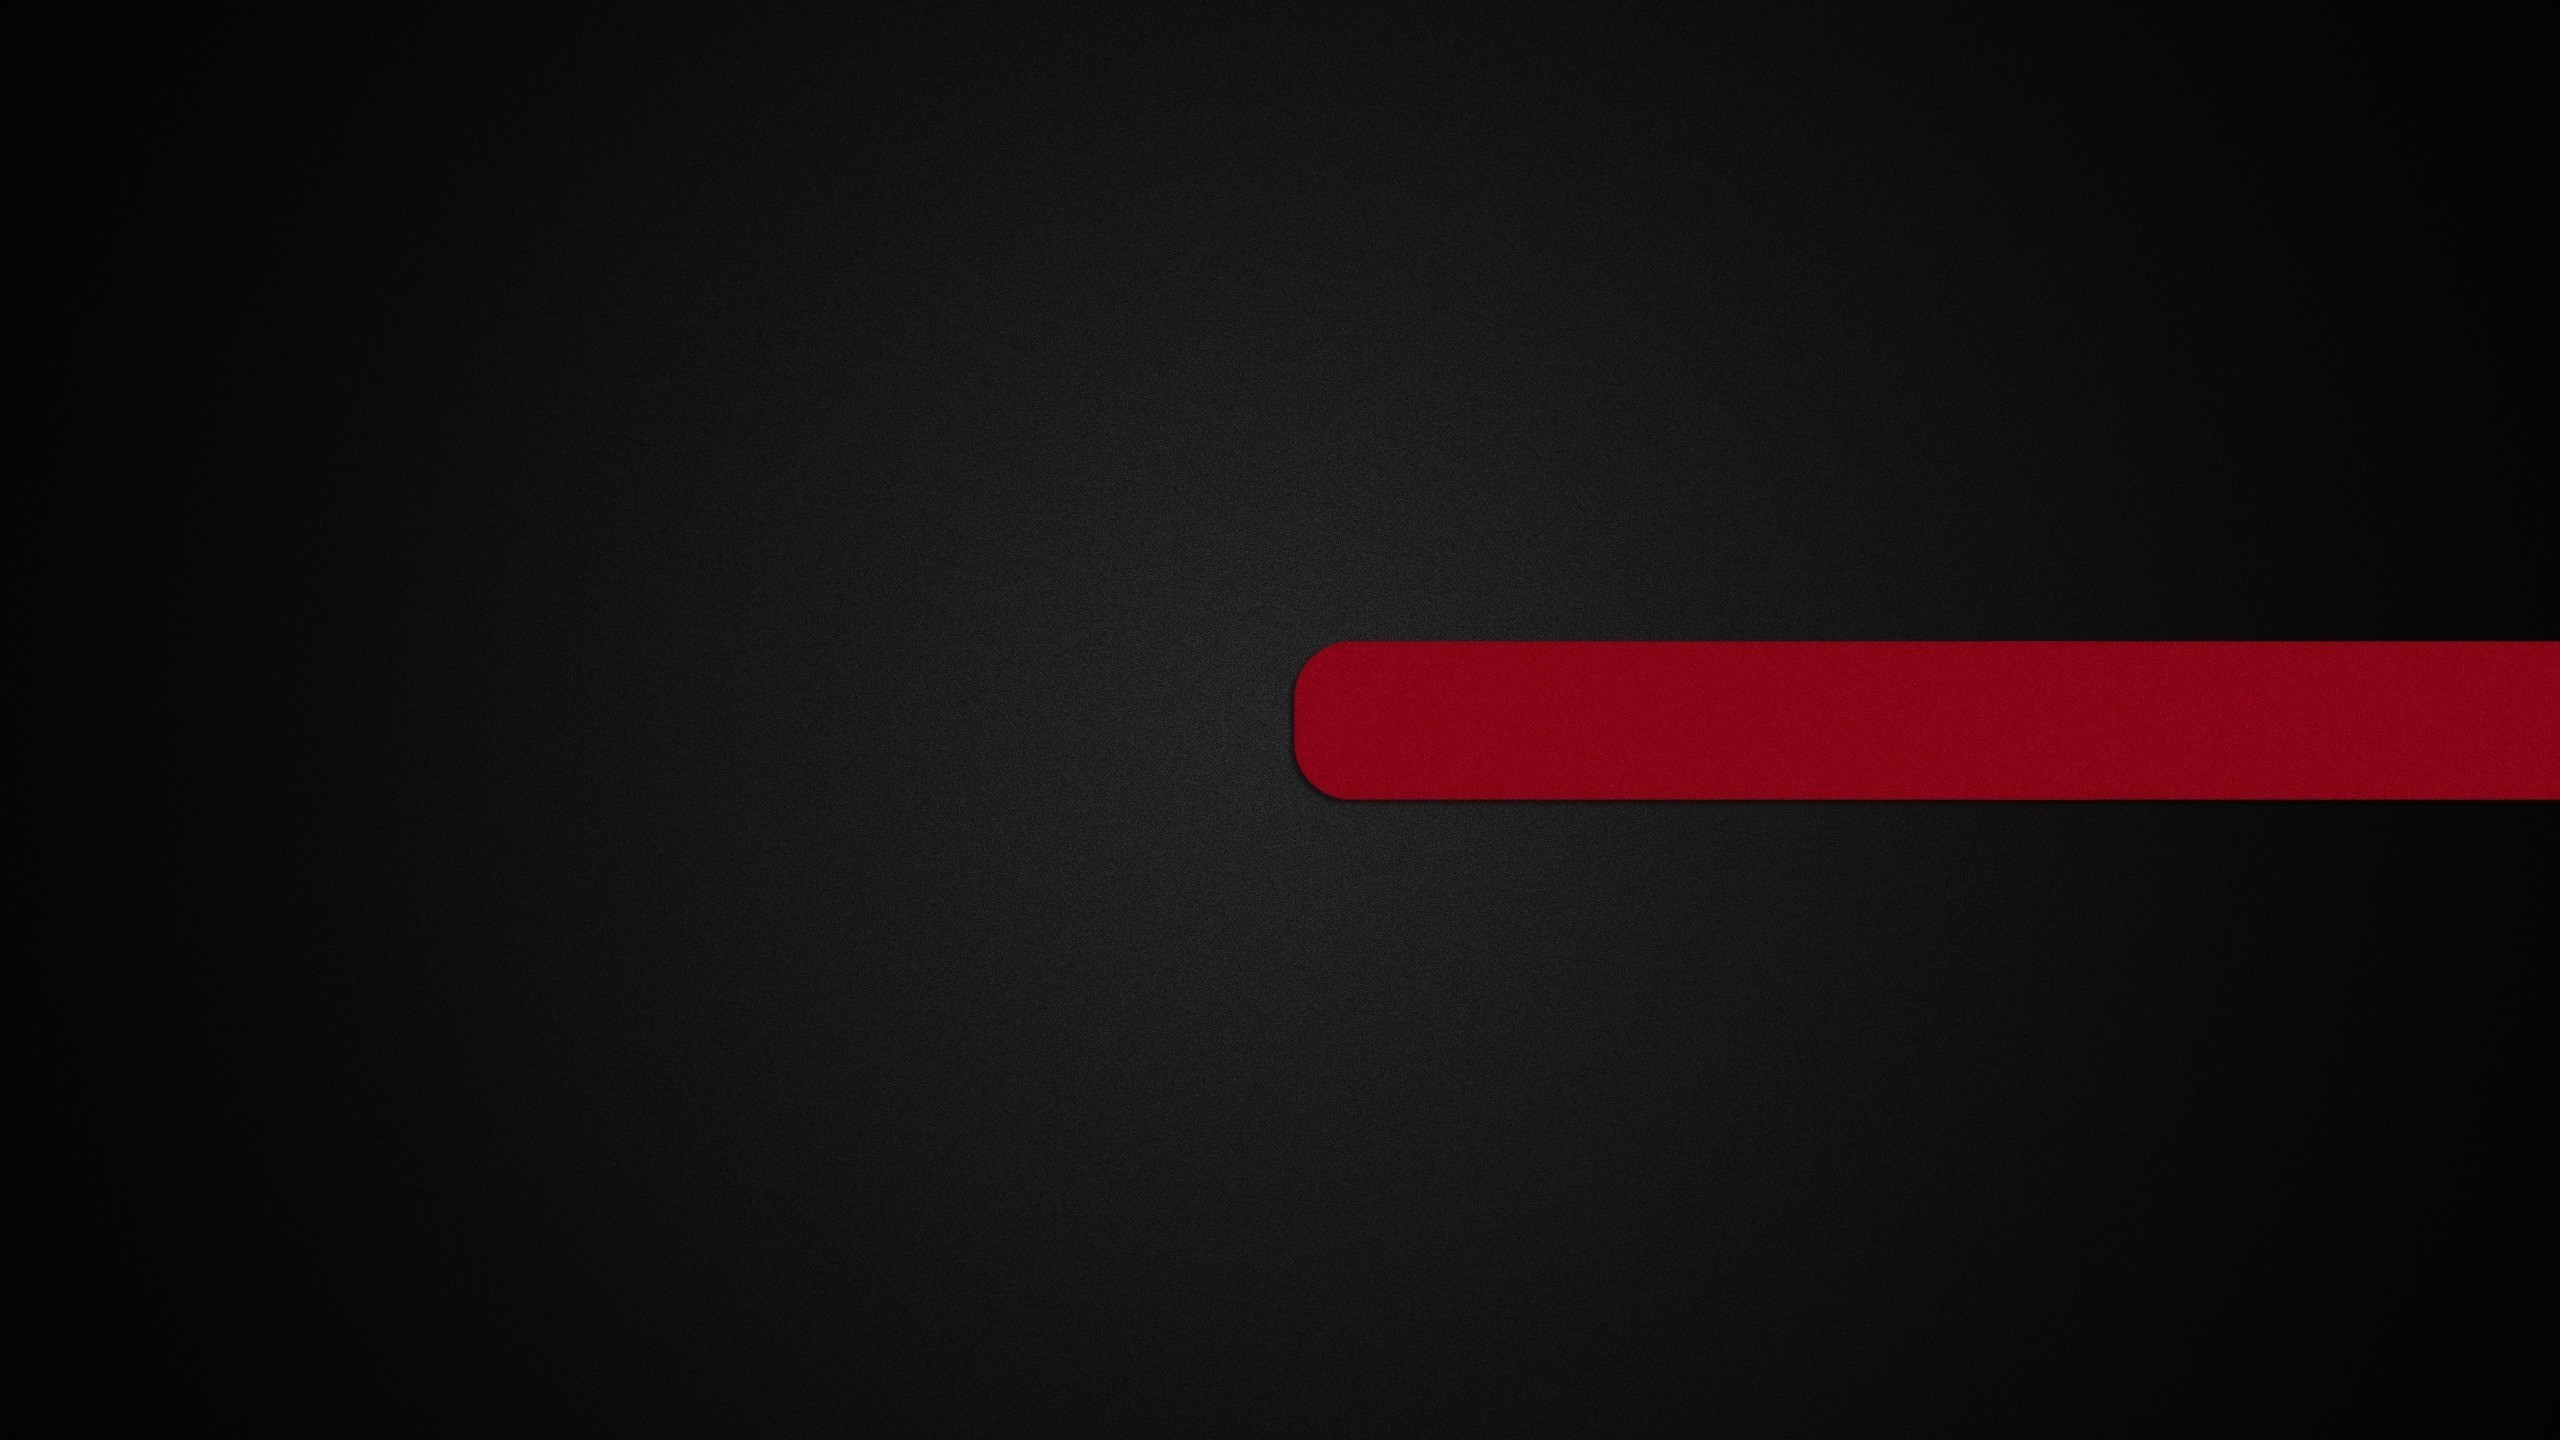 2560x1440 HD Black And Red Wallpapers Group (89+)